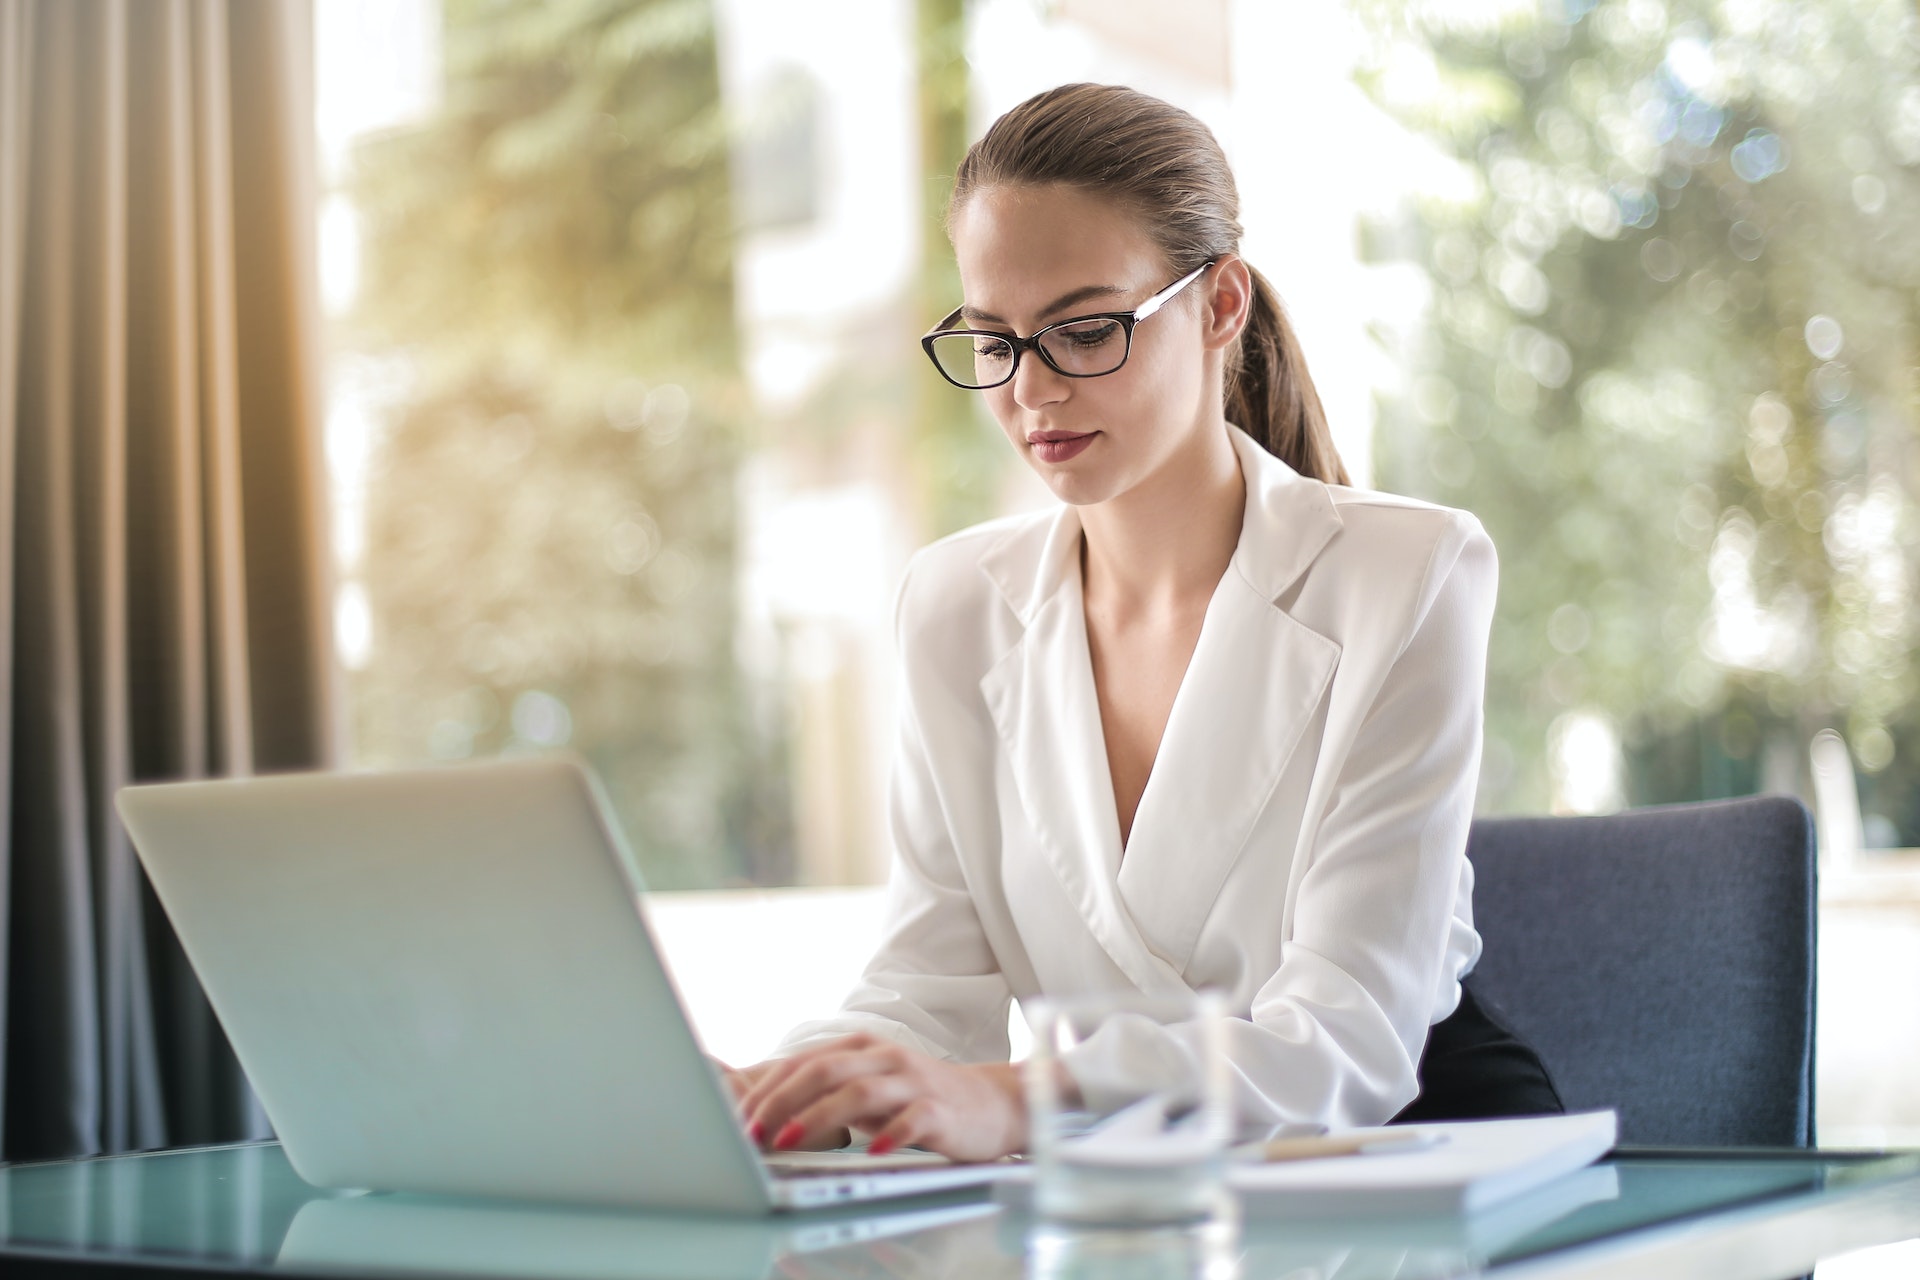 A confident career-oriented woman working on her laptop | Source: Pexels